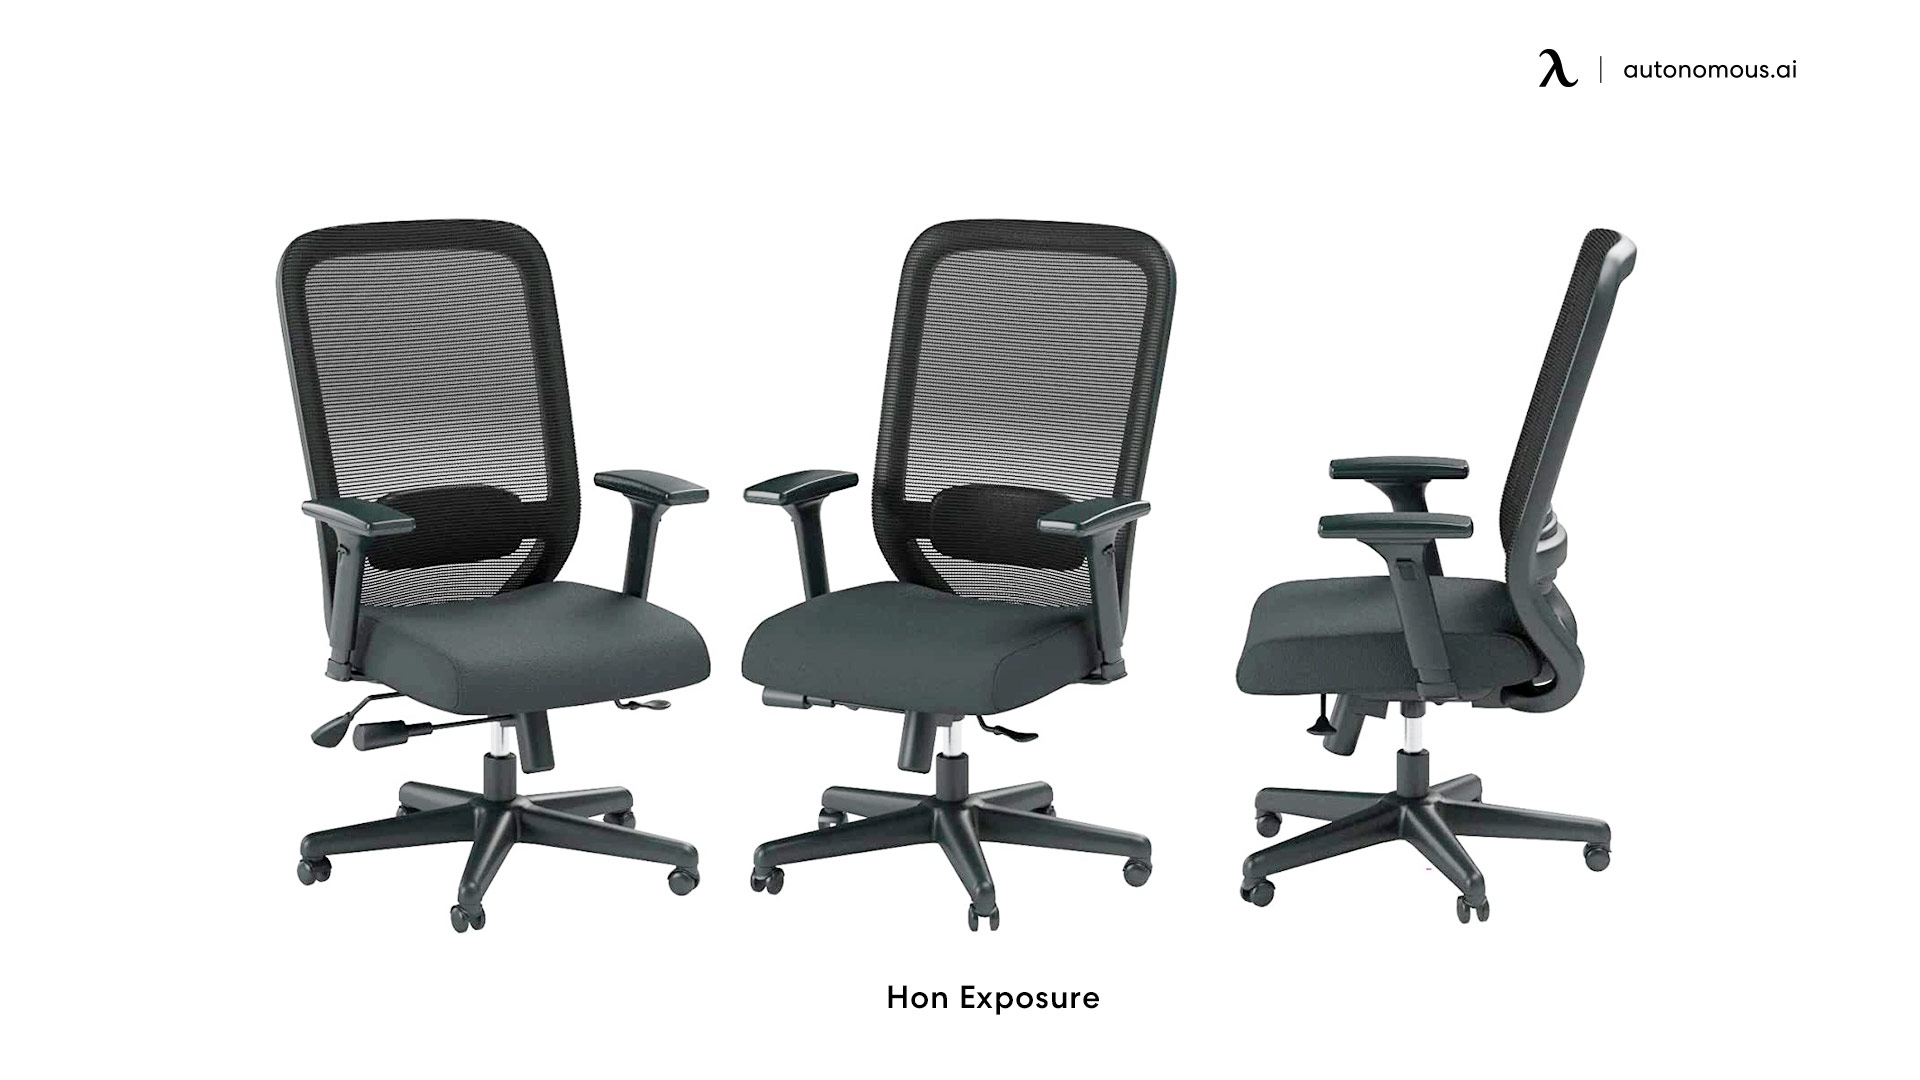 Hon Exposure office chairs for leg circulation